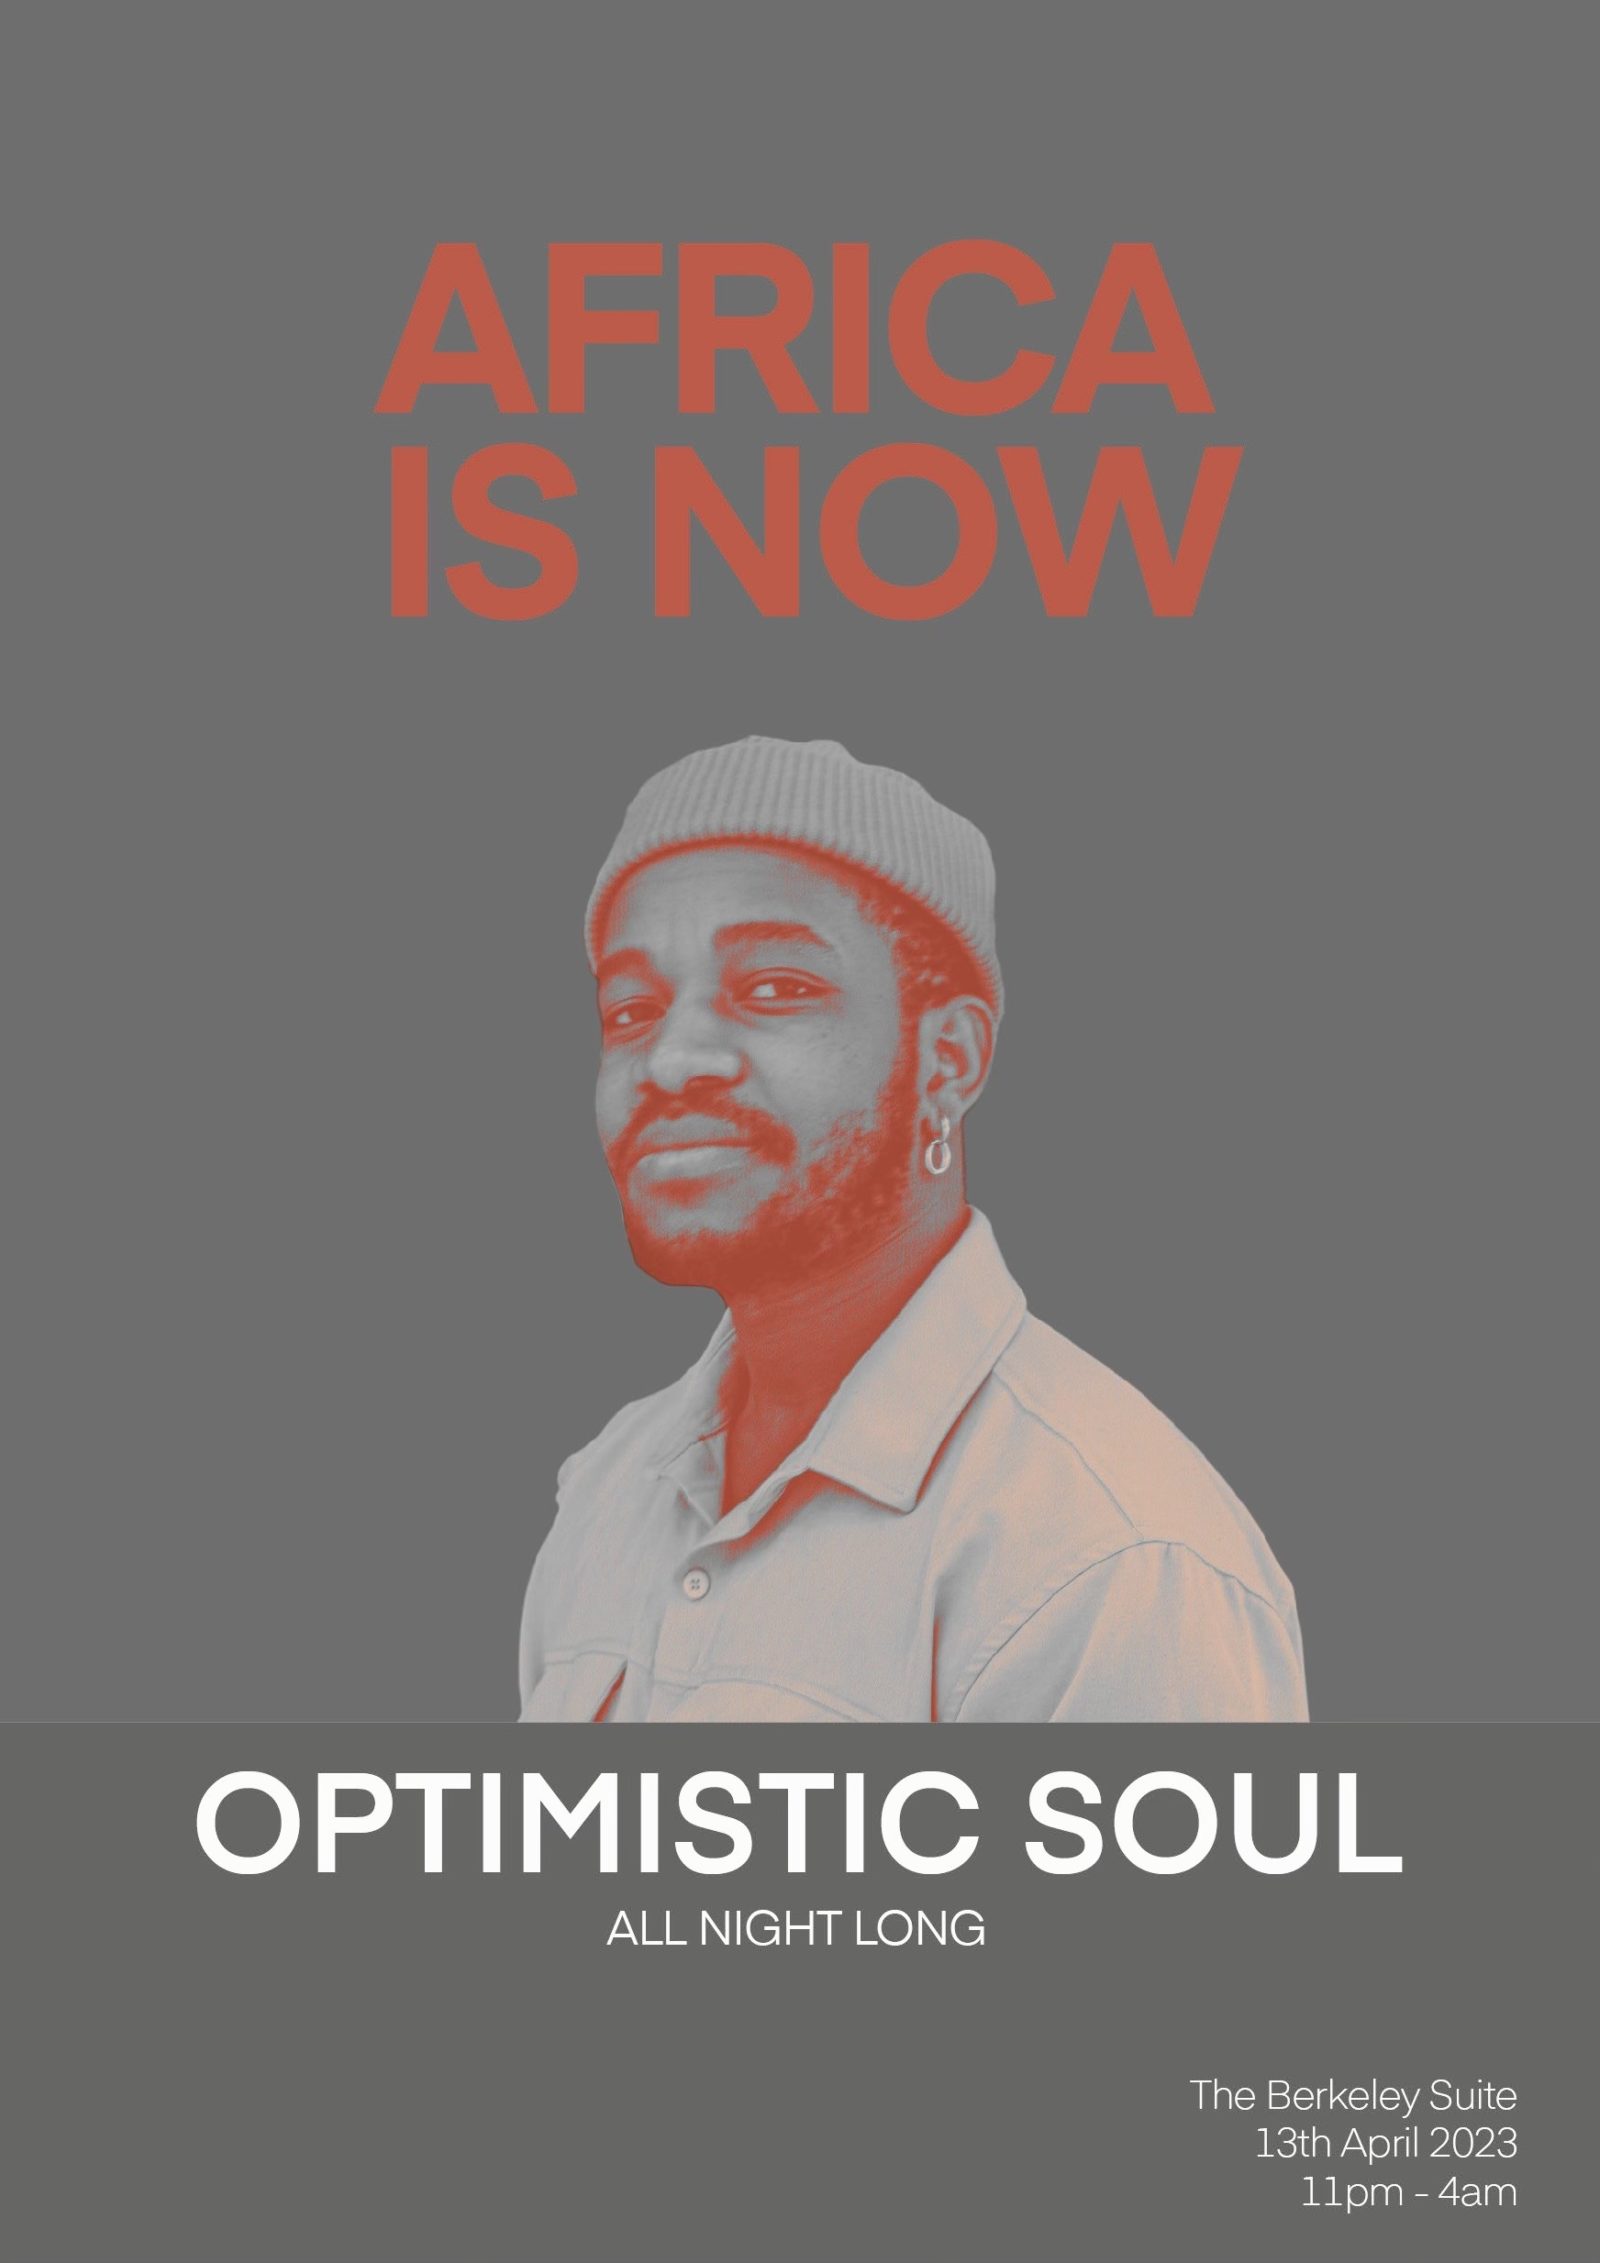 AFRICA IS NOW - OPTIMISTIC SOUL ALL NIGHT LONG